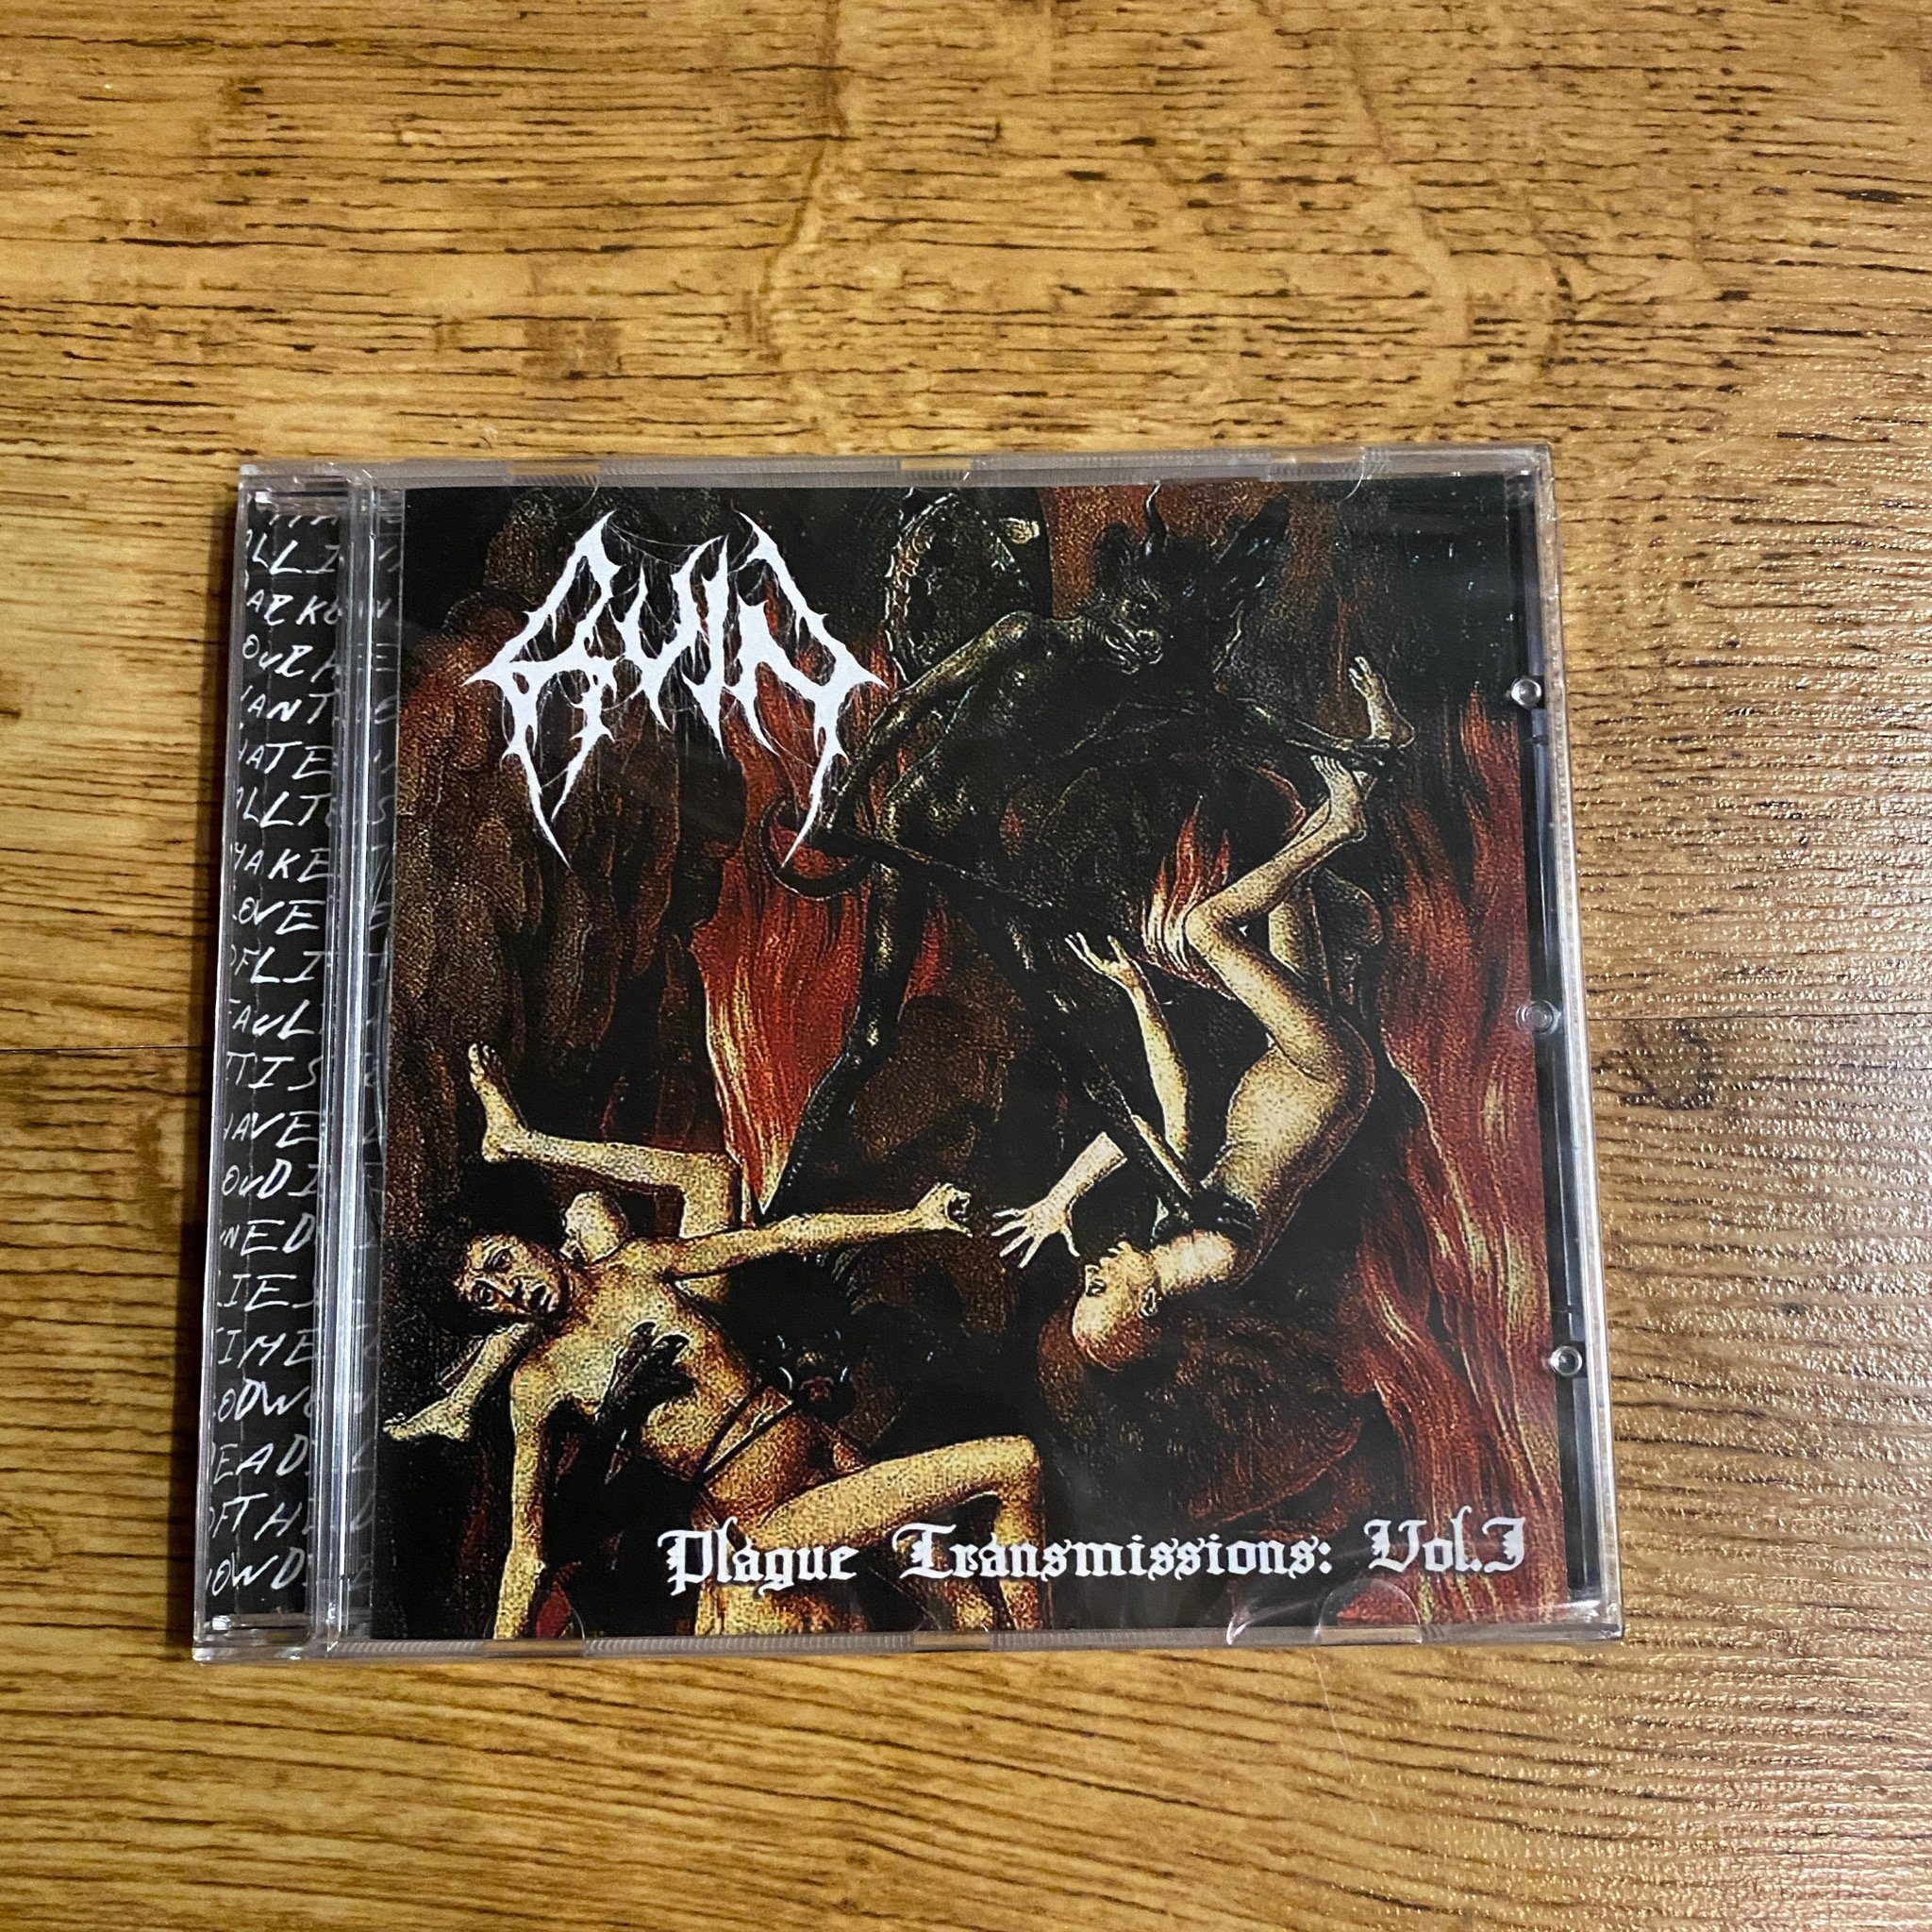 Photo of the Ruin - "Plague Transmissions: Vol. 1" CD